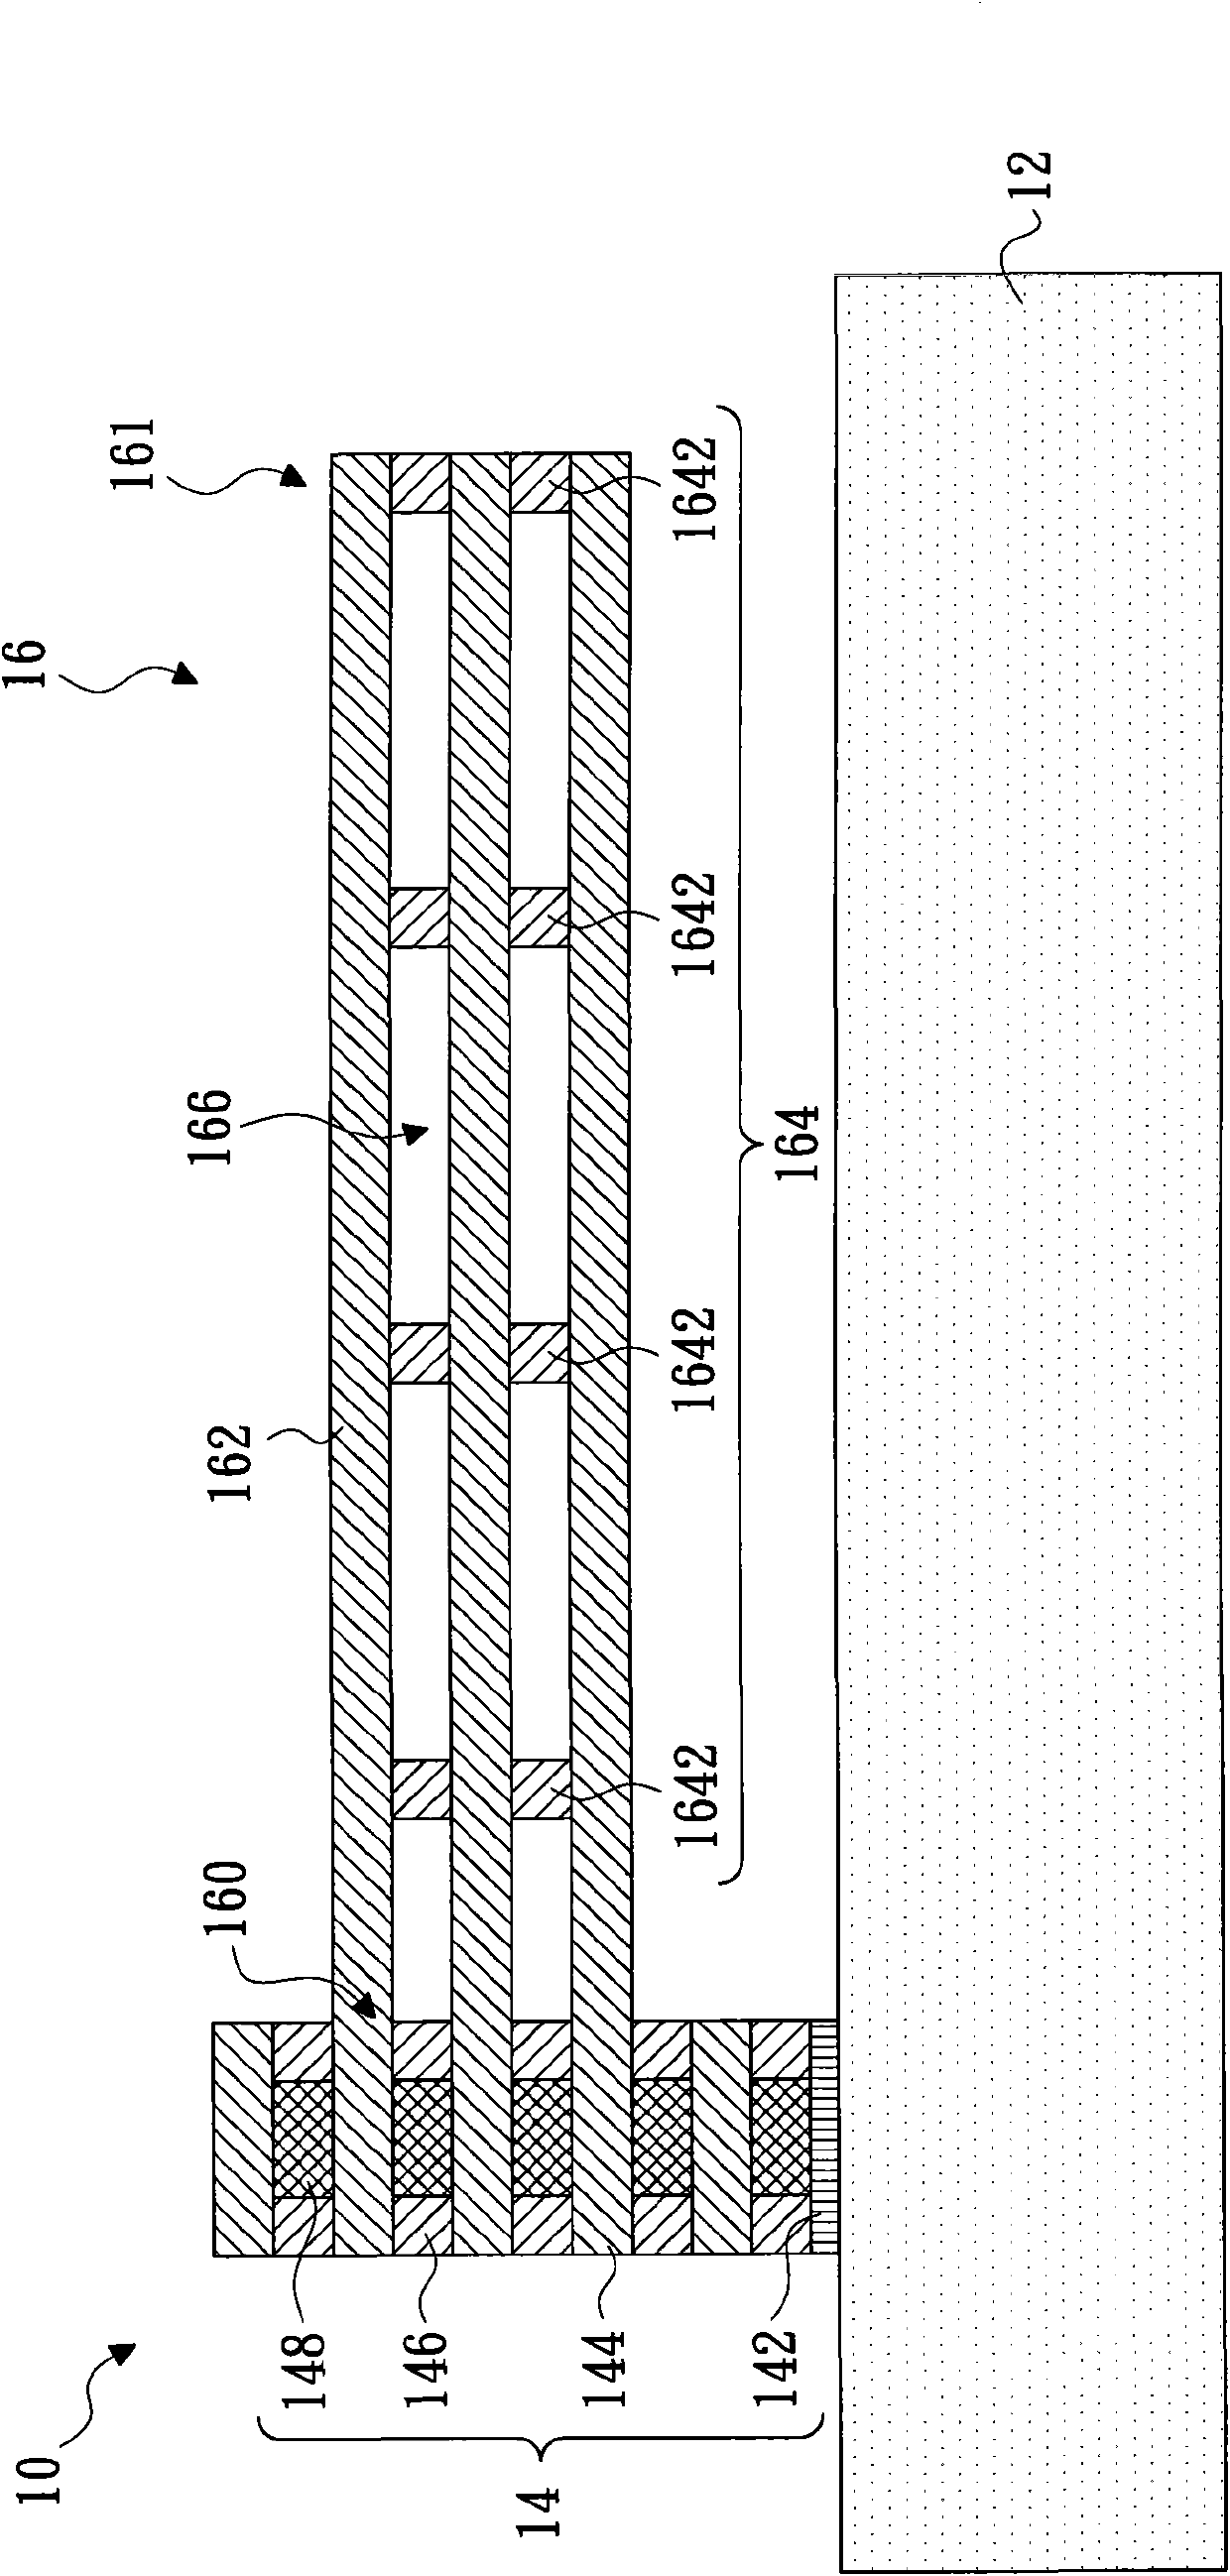 Micro electronmechanical element and micro electronmechanical spring element